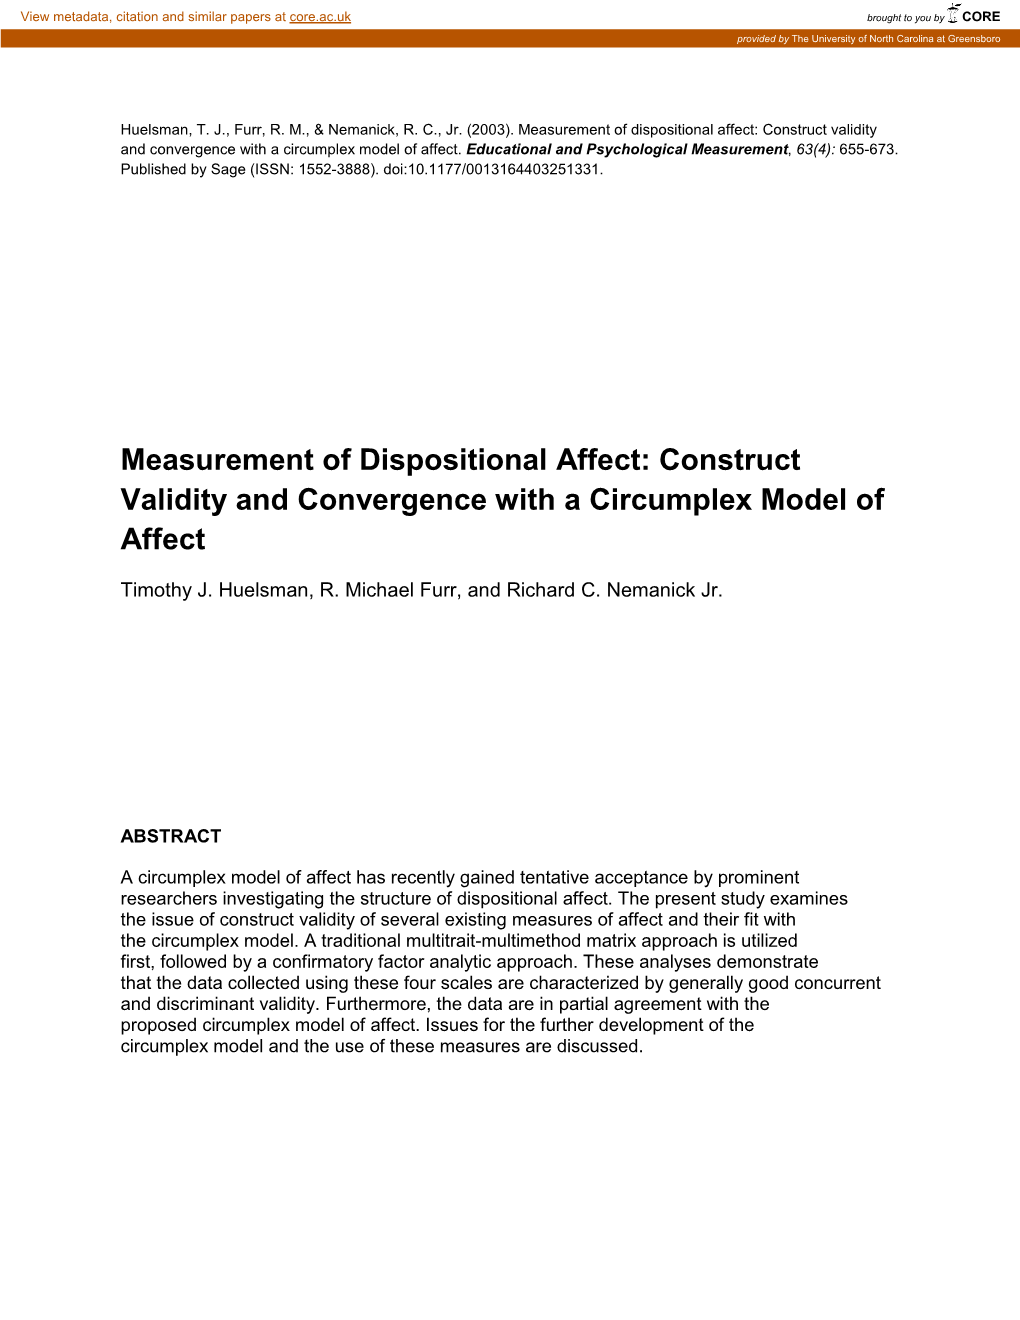 Measurement of Dispositional Affect: Construct Validity and Convergence with a Circumplex Model of Affect